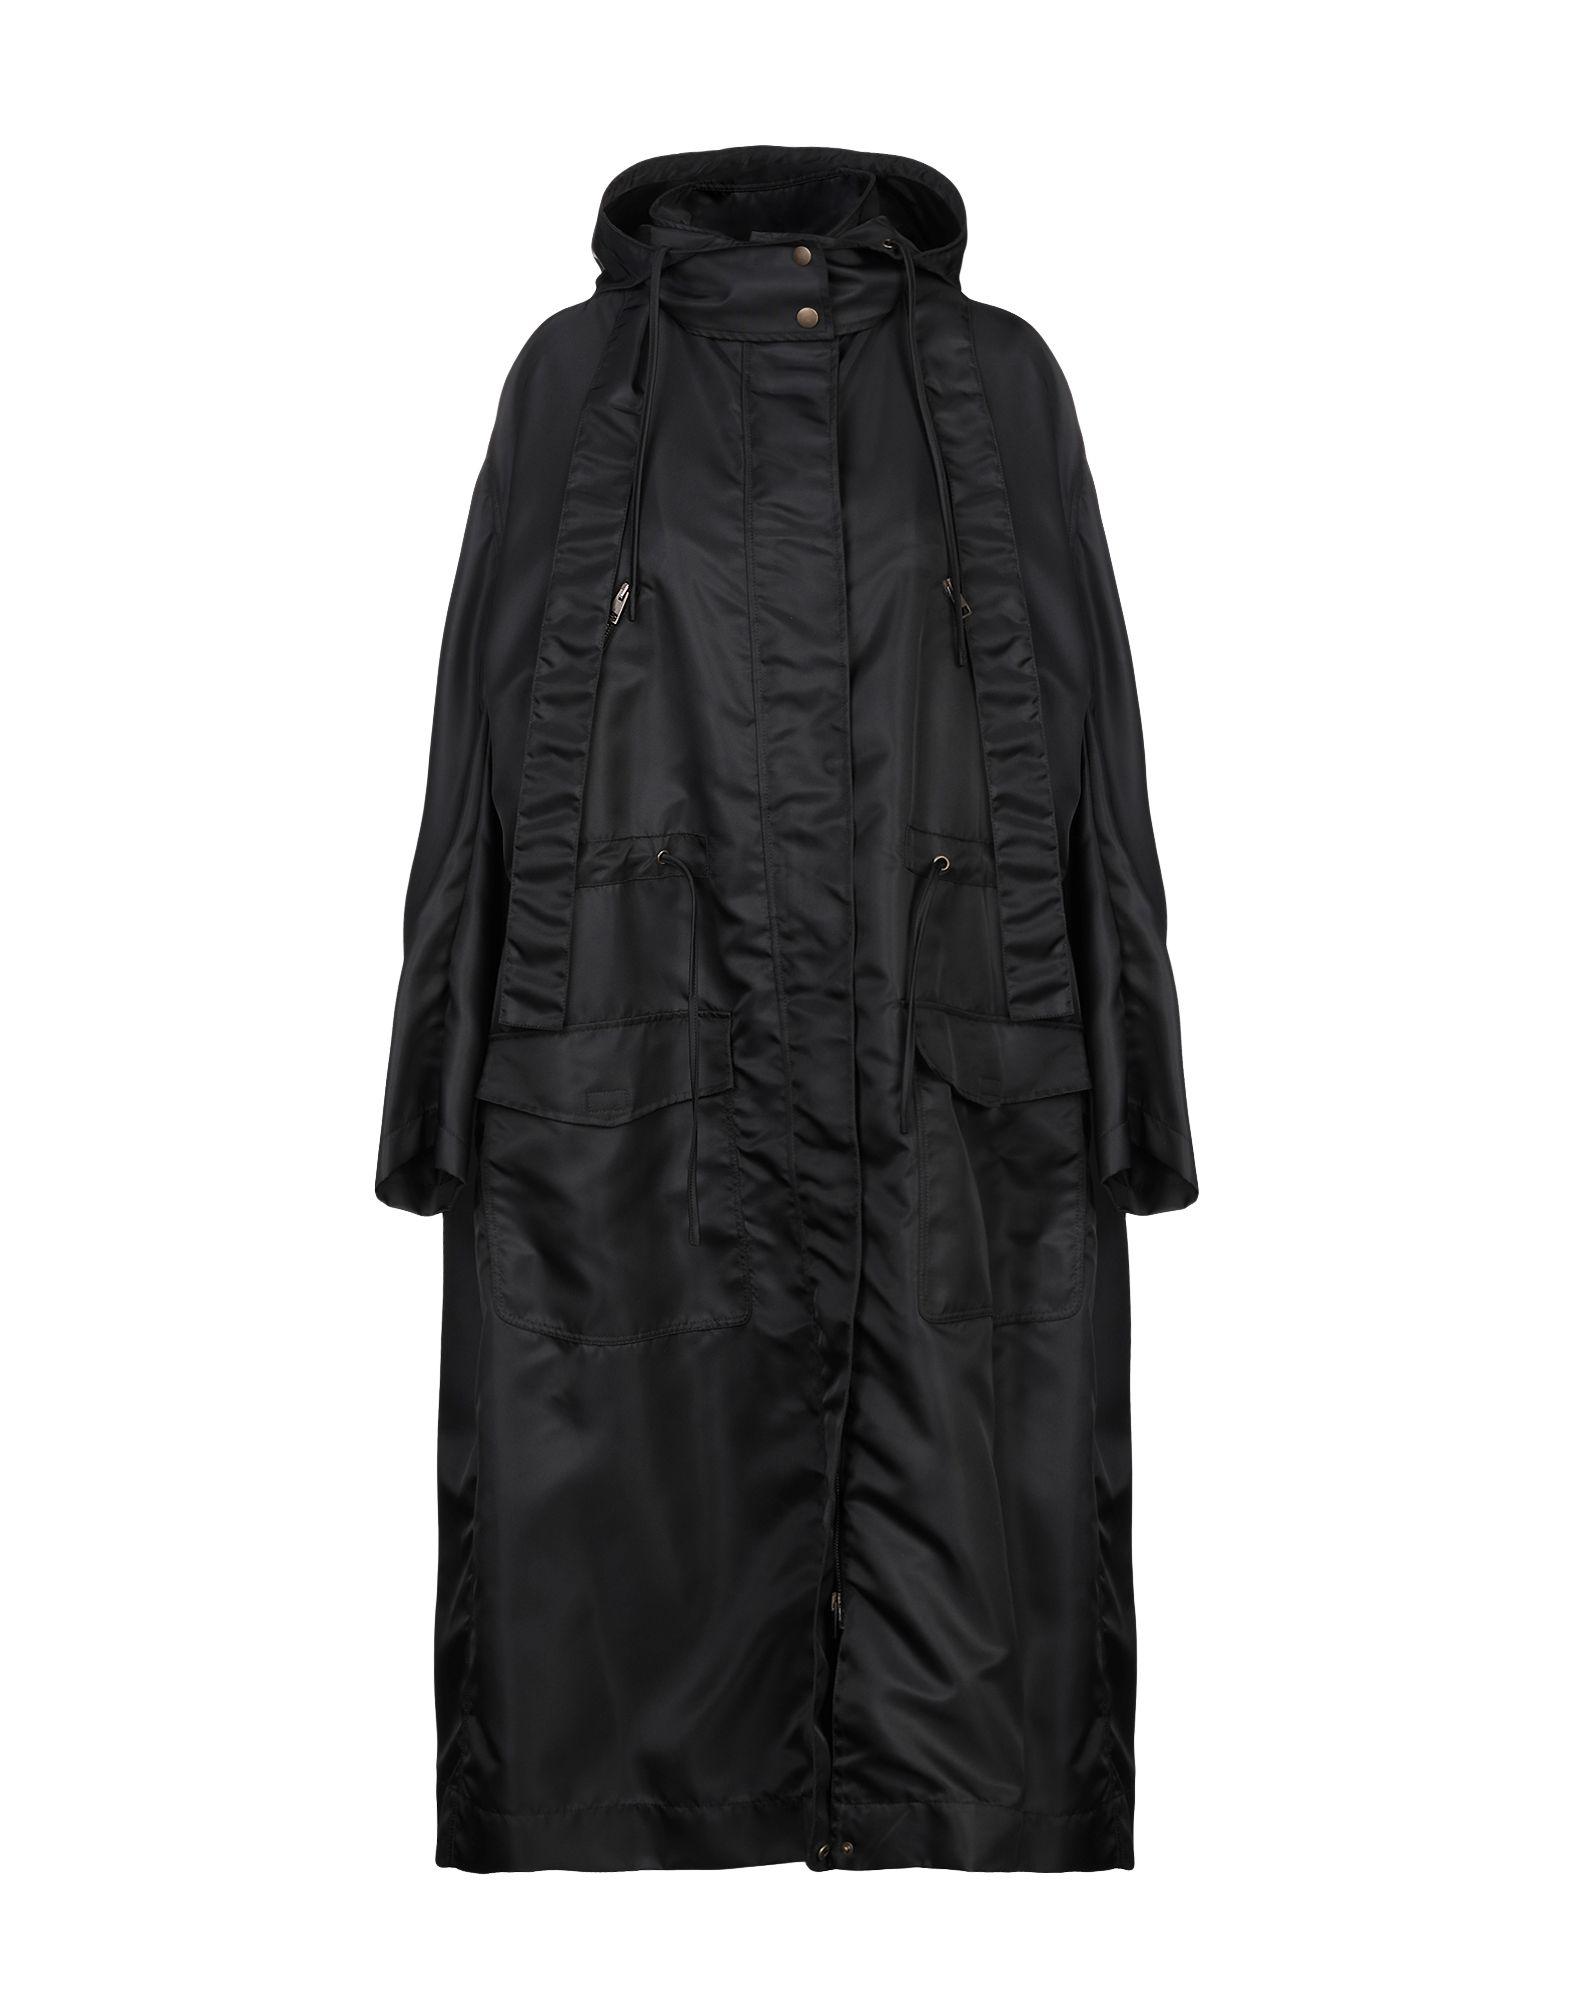 Valentino Synthetic Overcoat in Black - Lyst